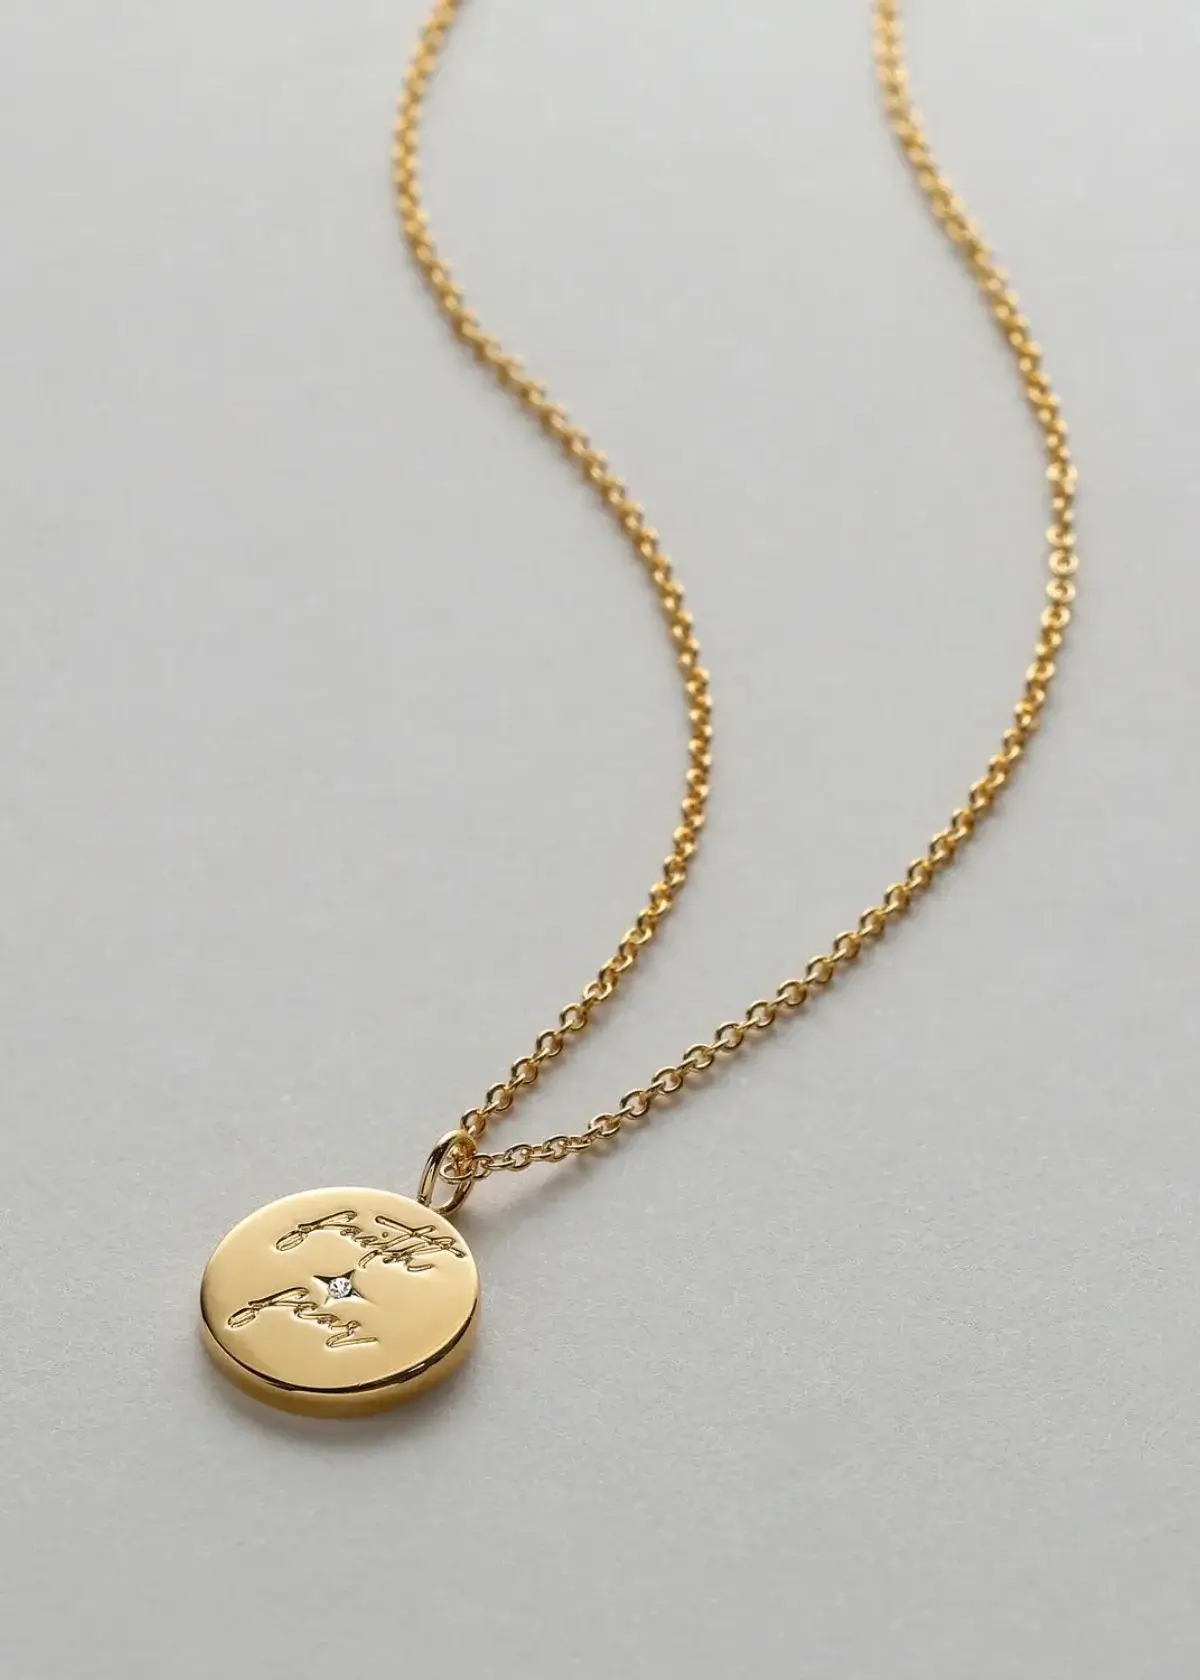 How to Choose the Right Faith over fear Necklace?